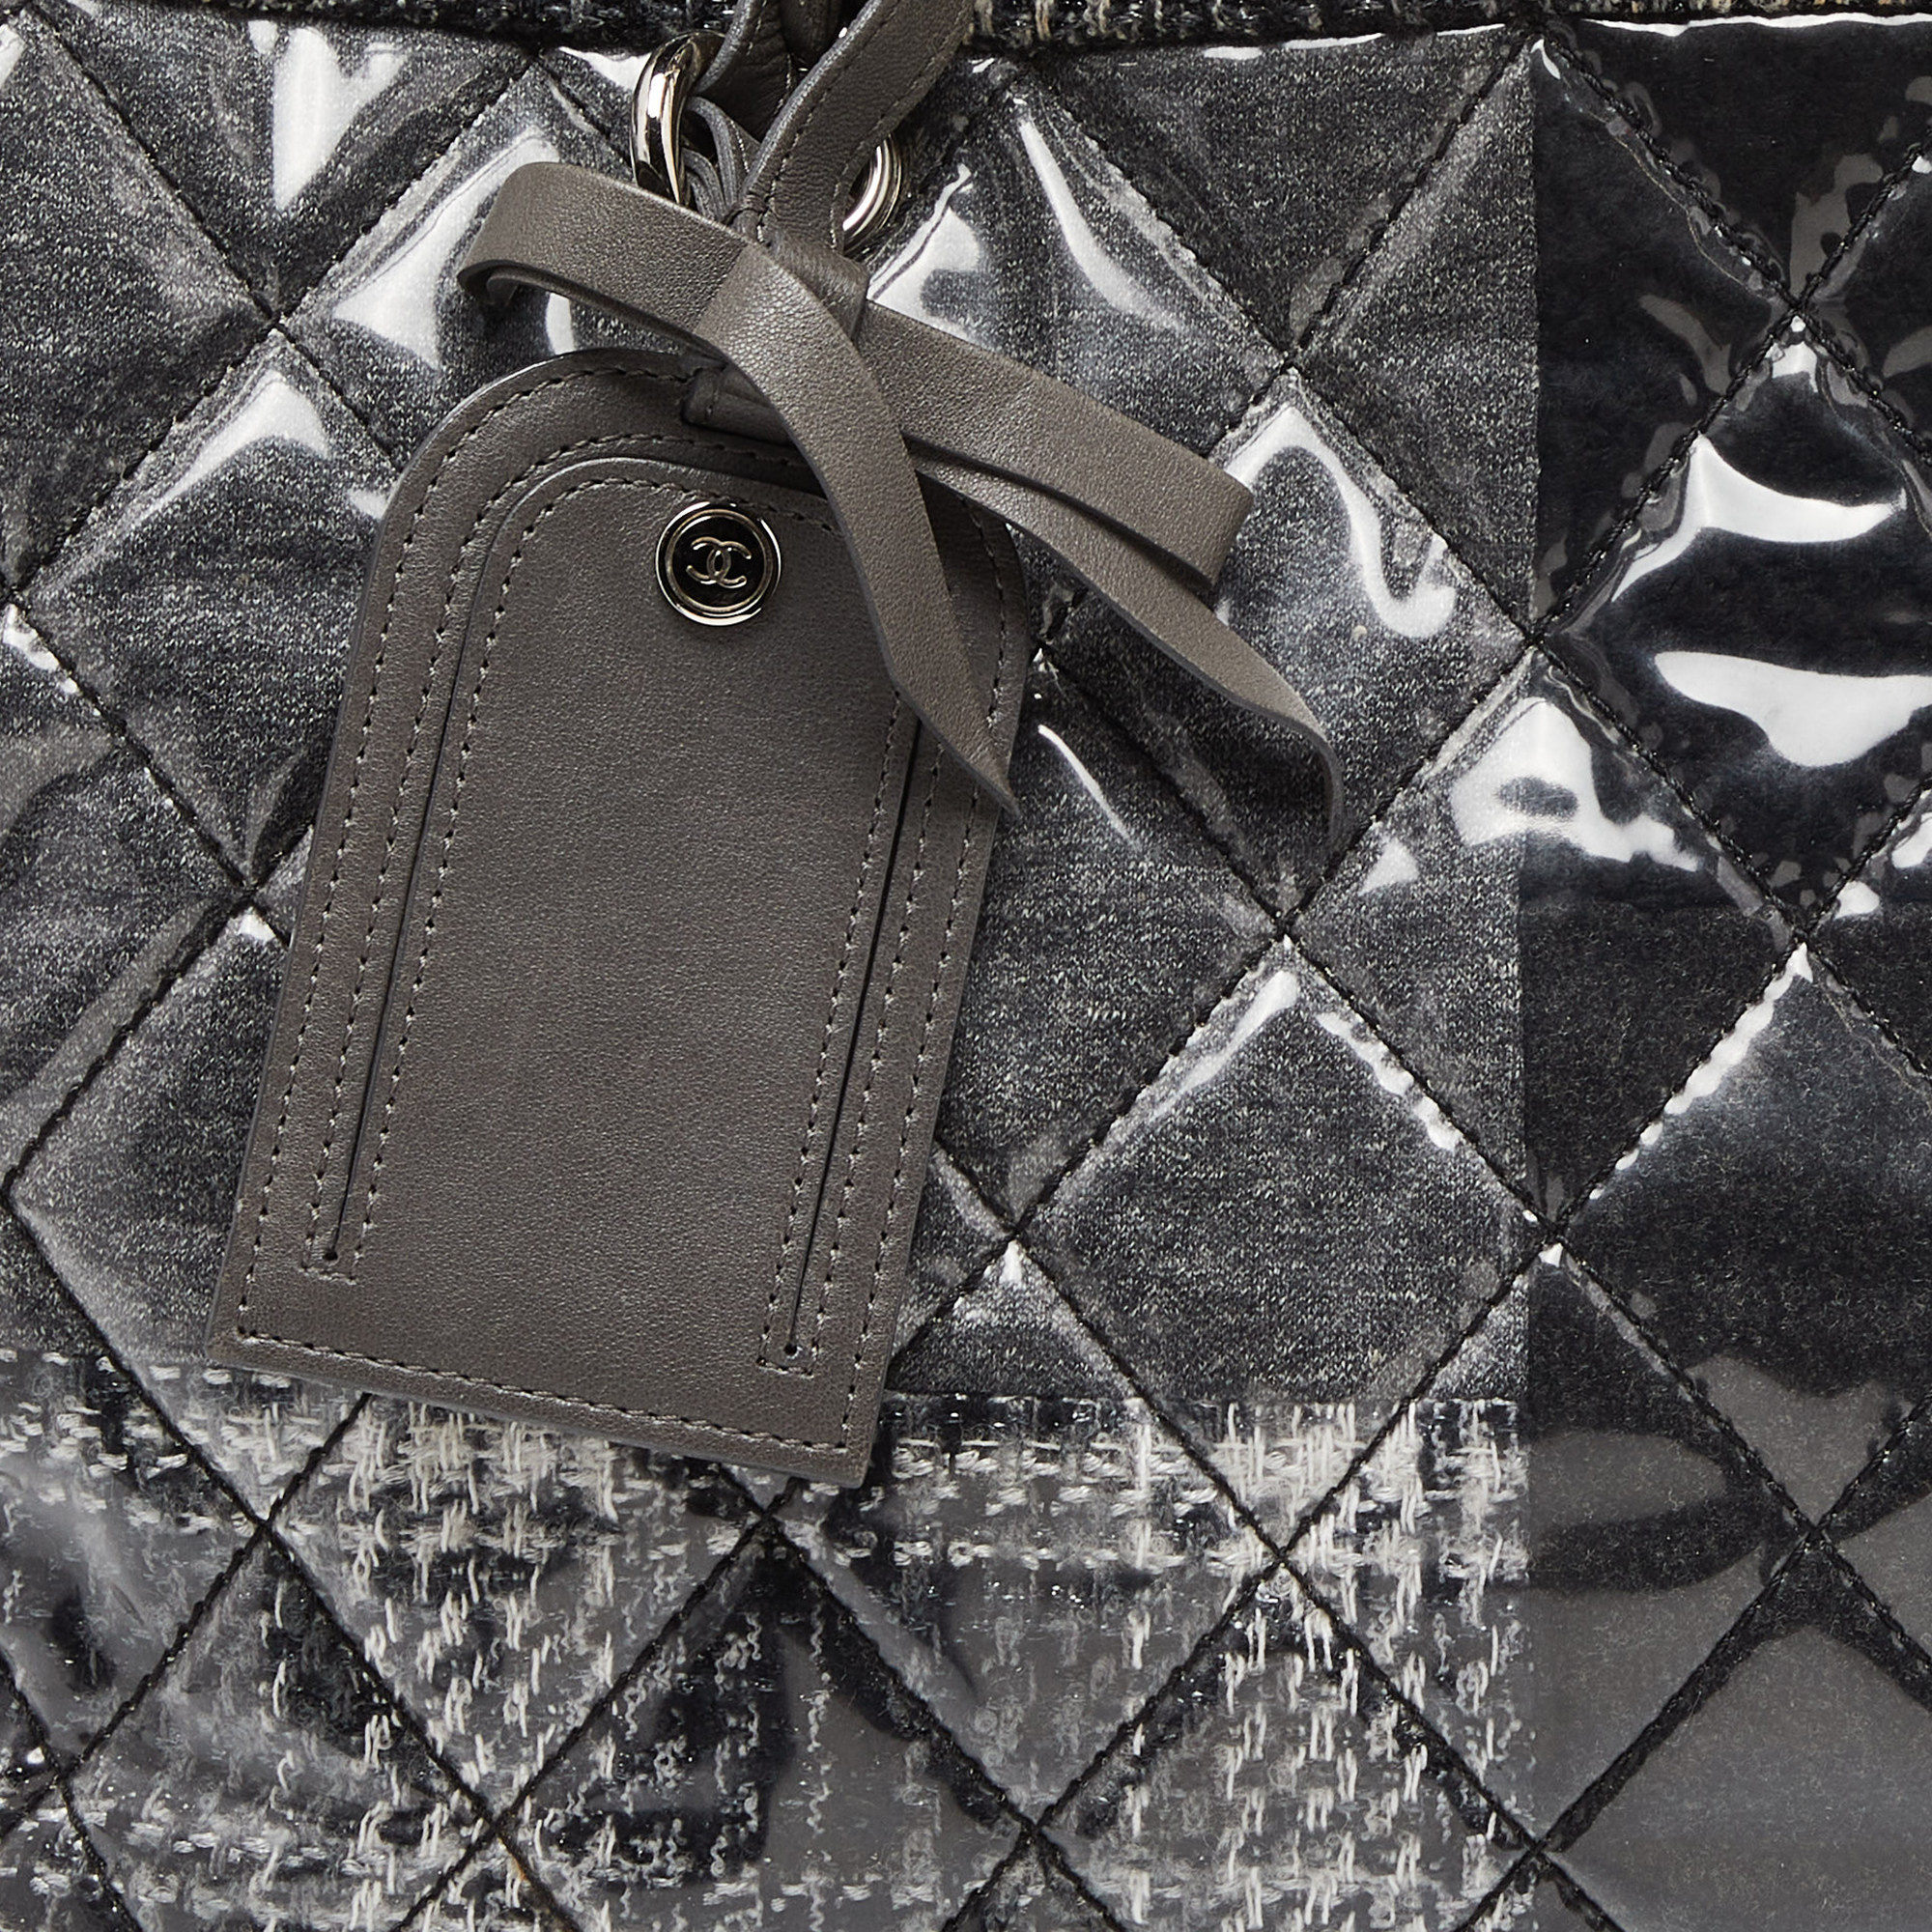 Chanel Grey Quilted Vinyl And Tweed Funny Patchwork Tote